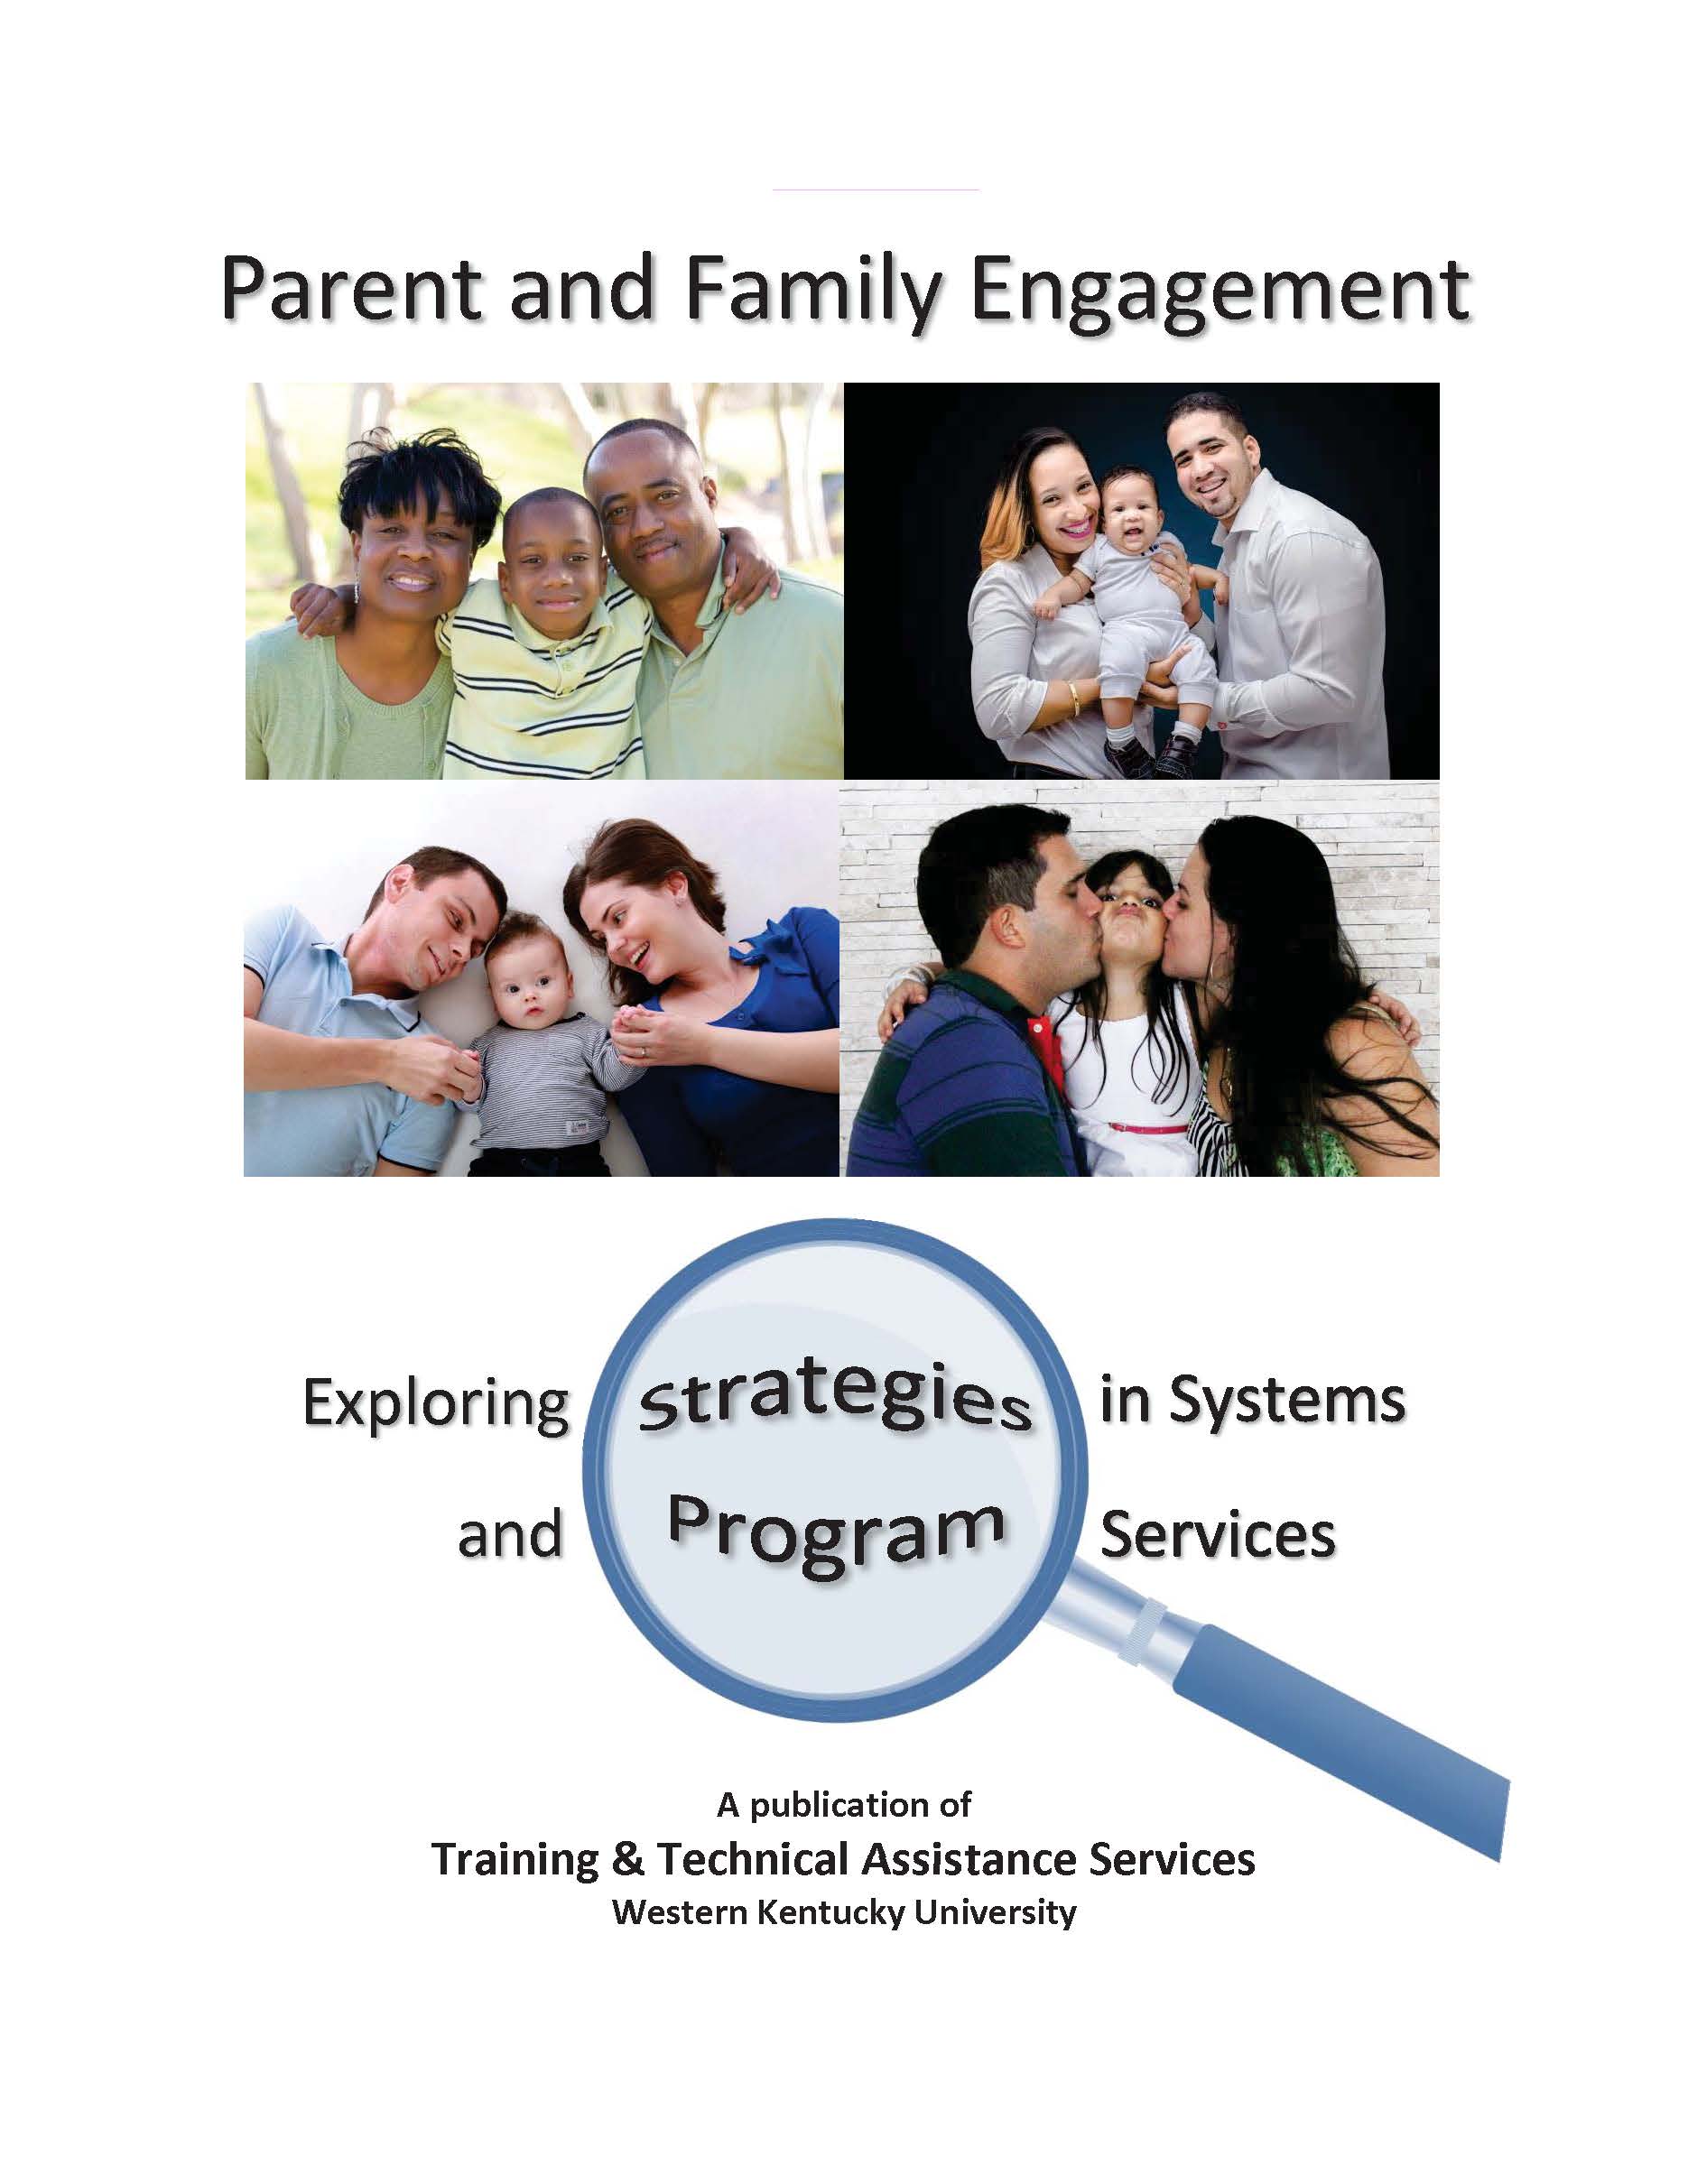 Parent and Family Engagement book cover